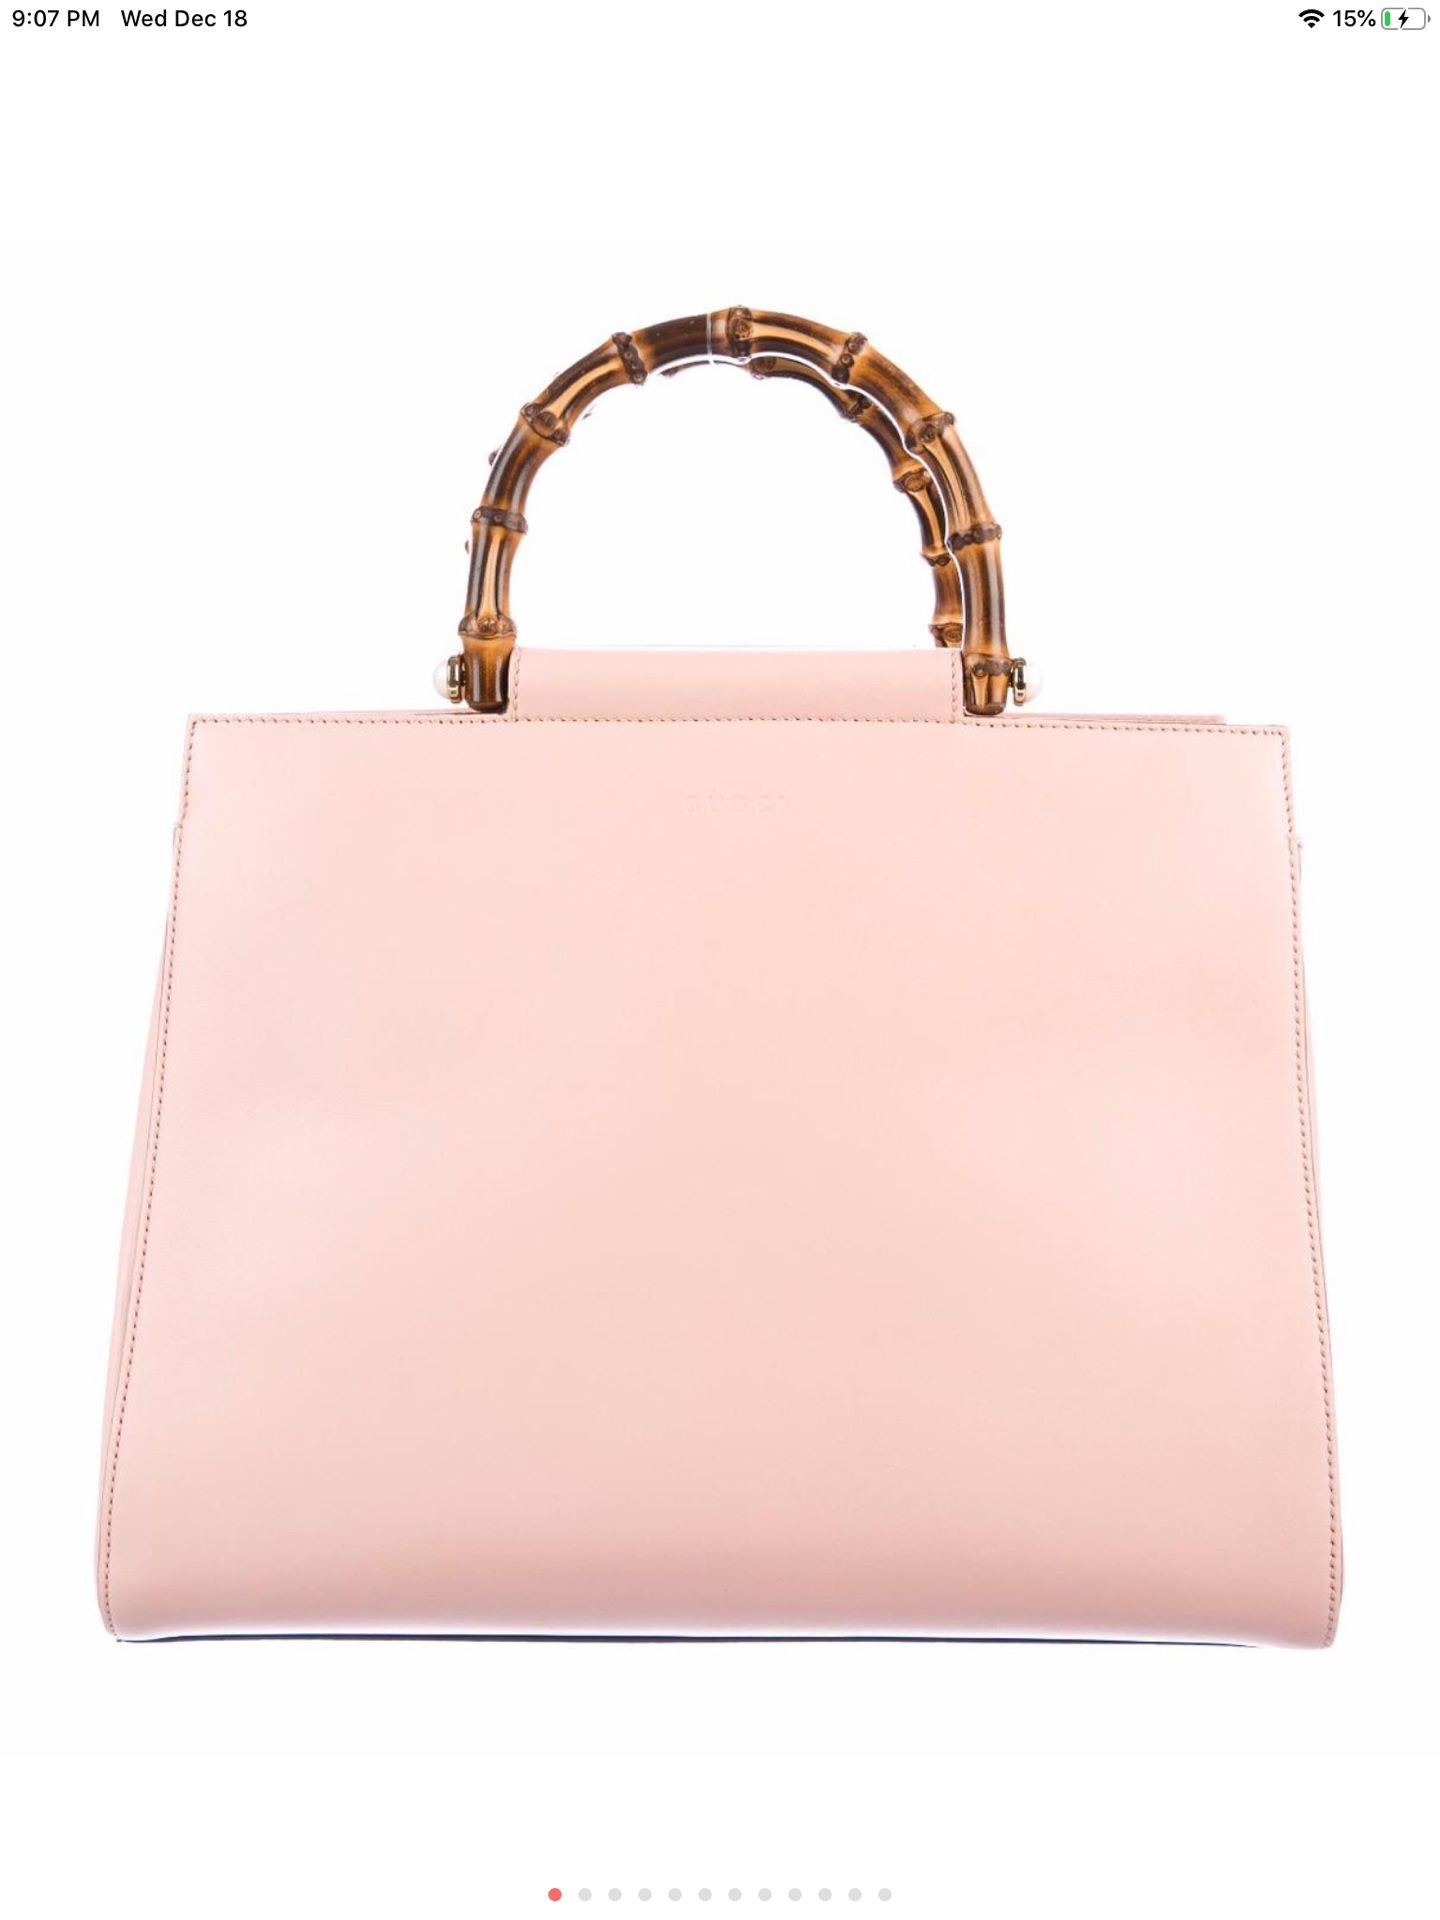 Gucci pink leather bamboo handbag with shoulder strap